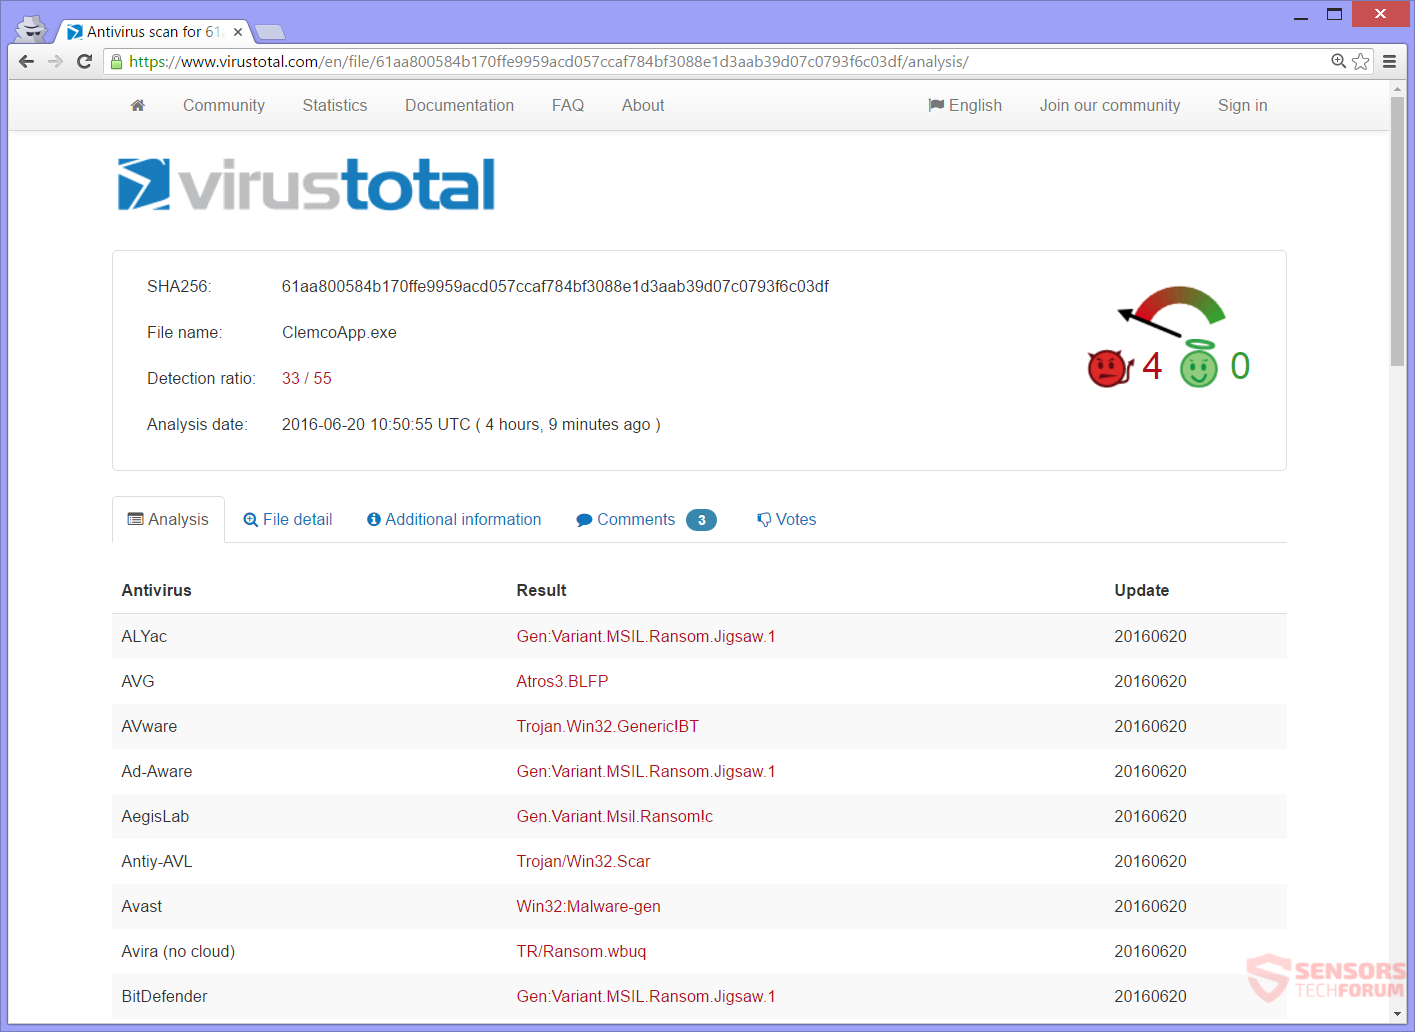 A Variant Of Win32/Ramnit.F Virus